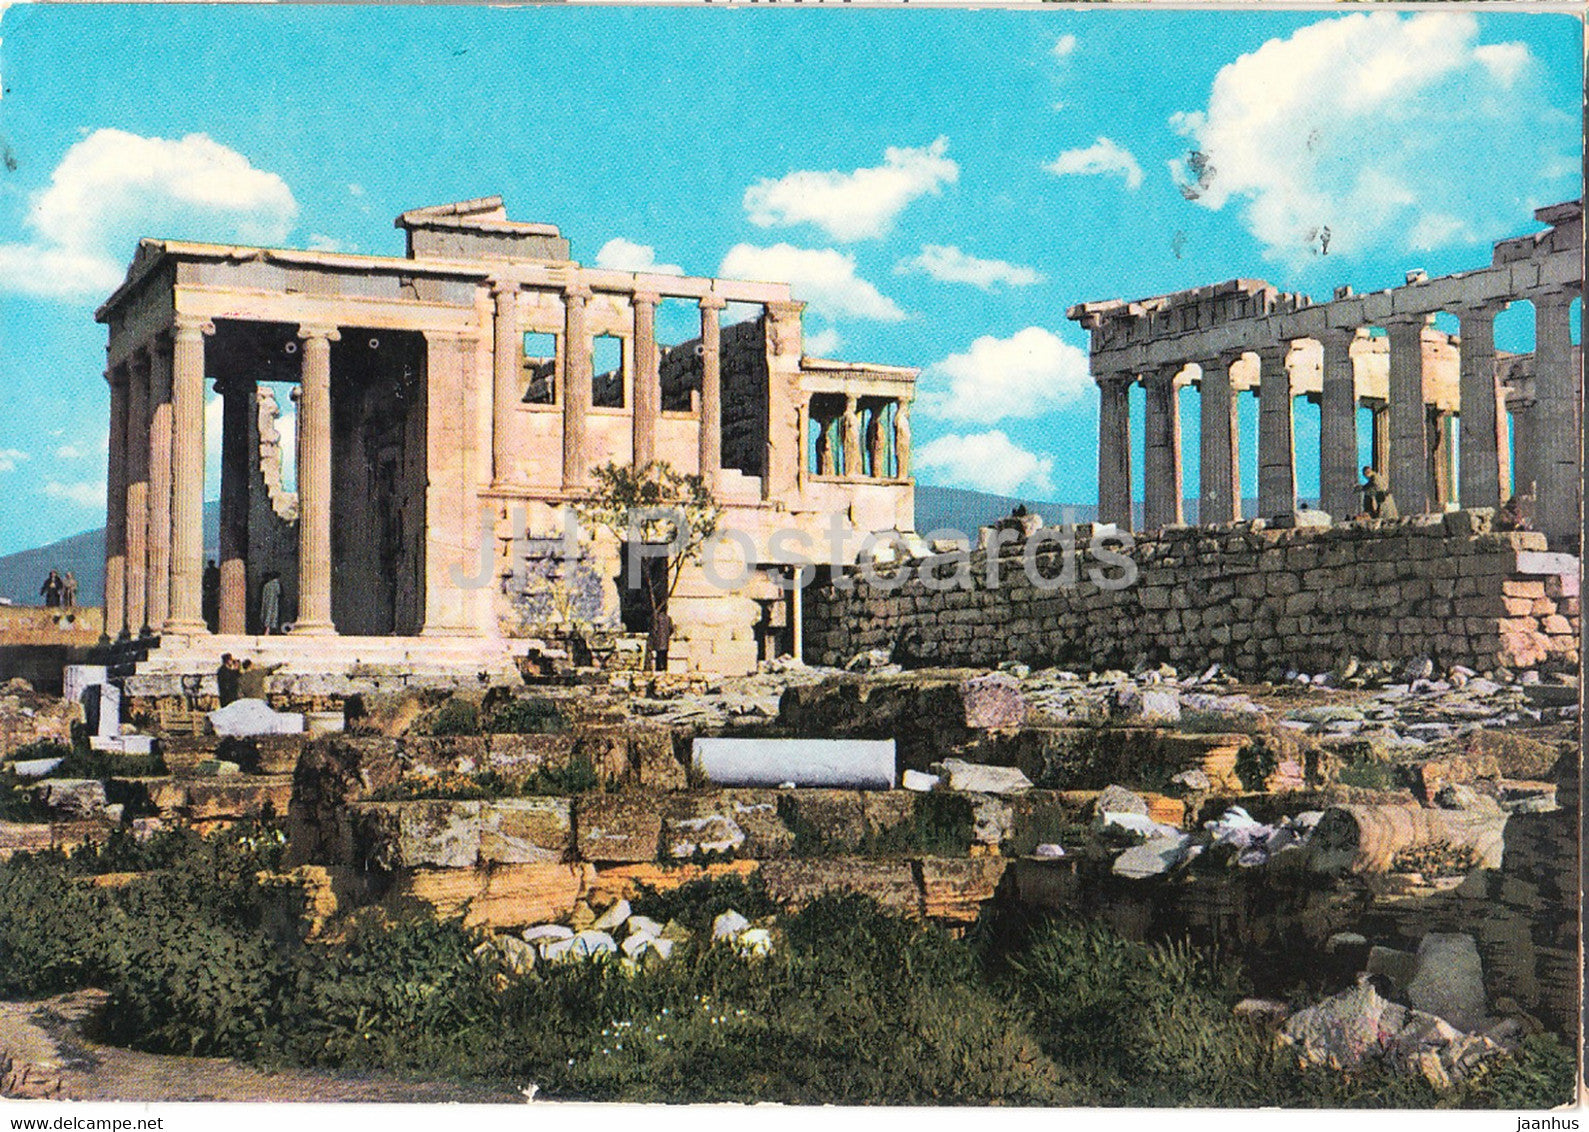 Athens - Acropolis - The Erechtheion - Ancient Greece - 1977 - Greece - used - JH Postcards